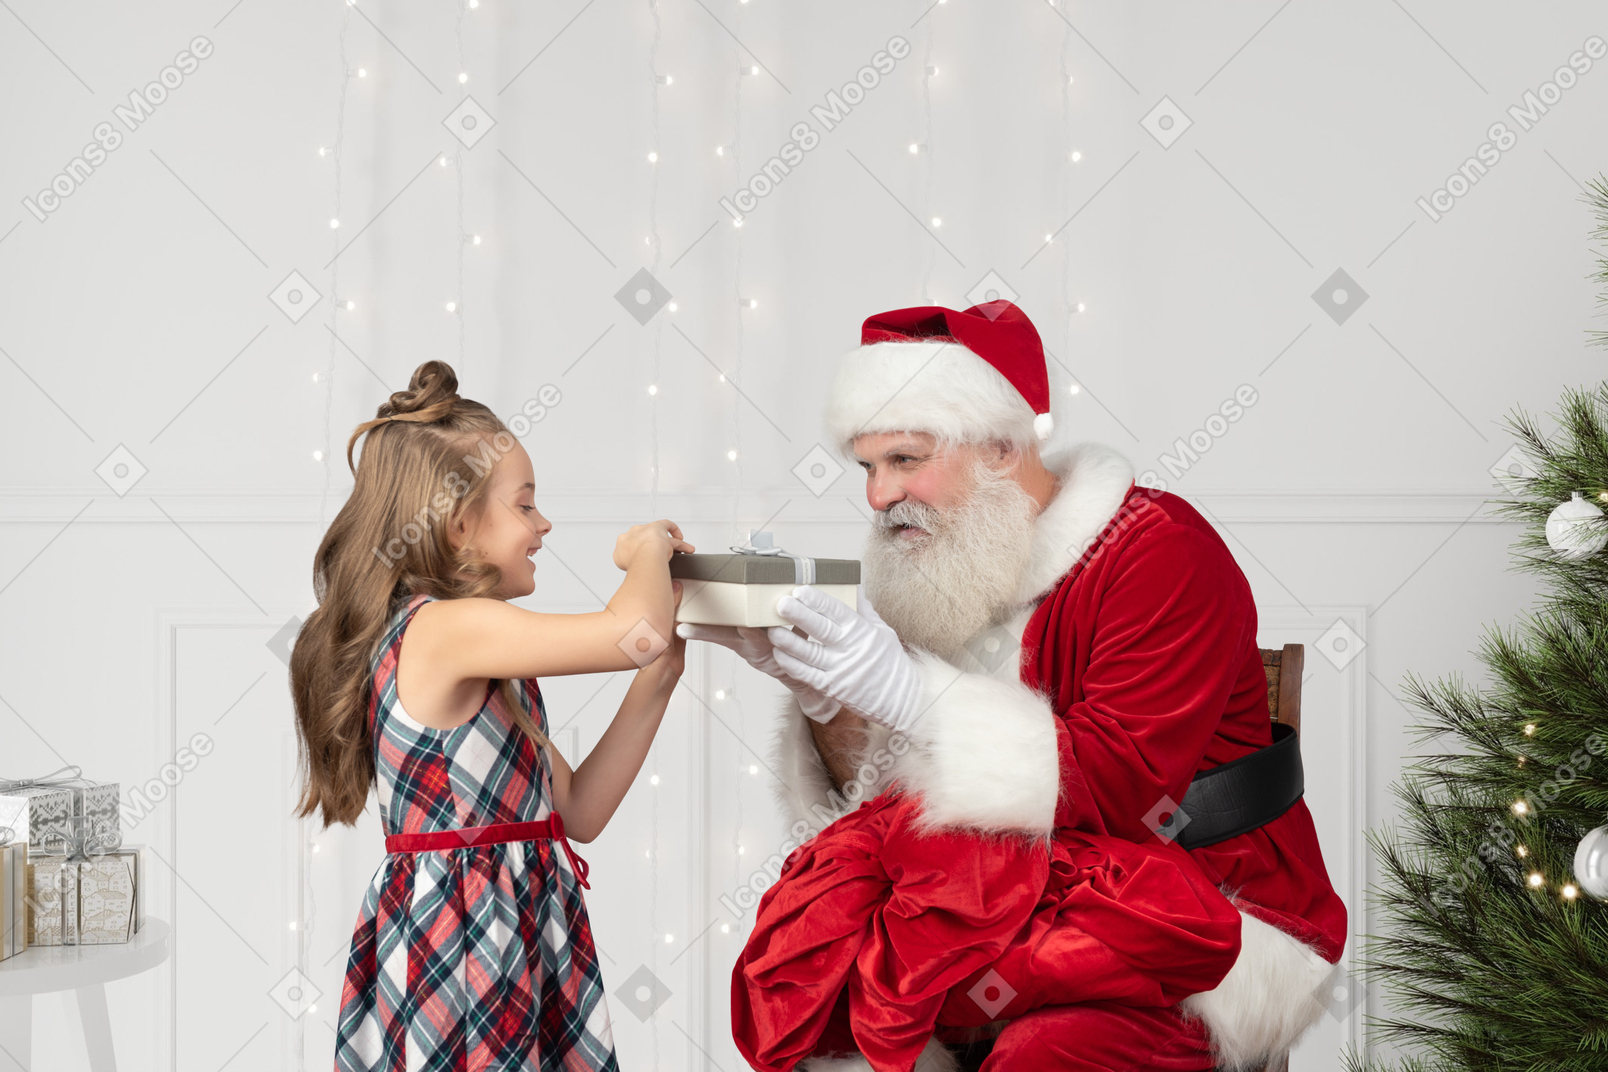 Little girl opening her gift from santa claus